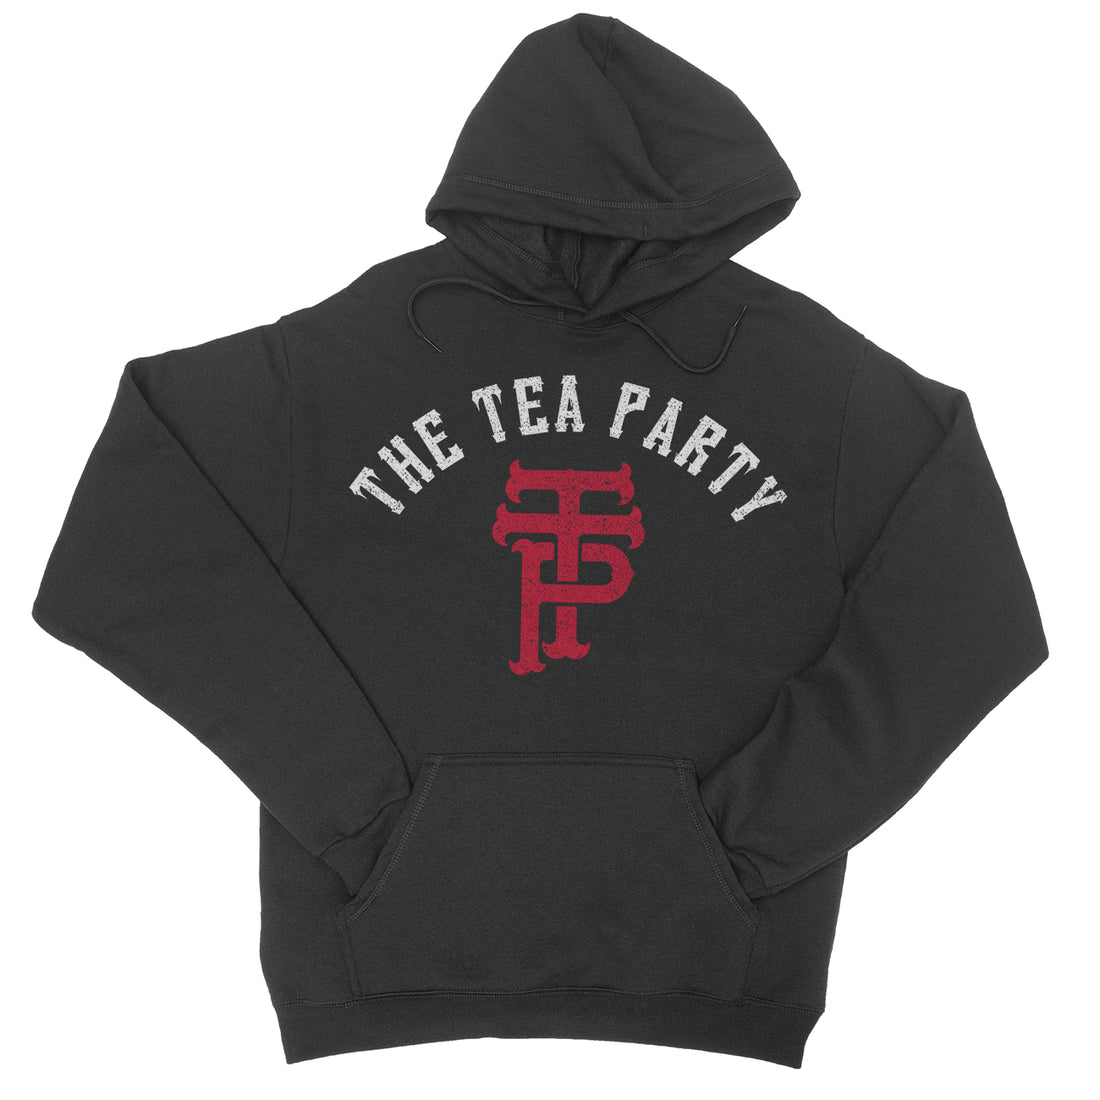 The Tea Party - TTP - Black Pullover Hoodie